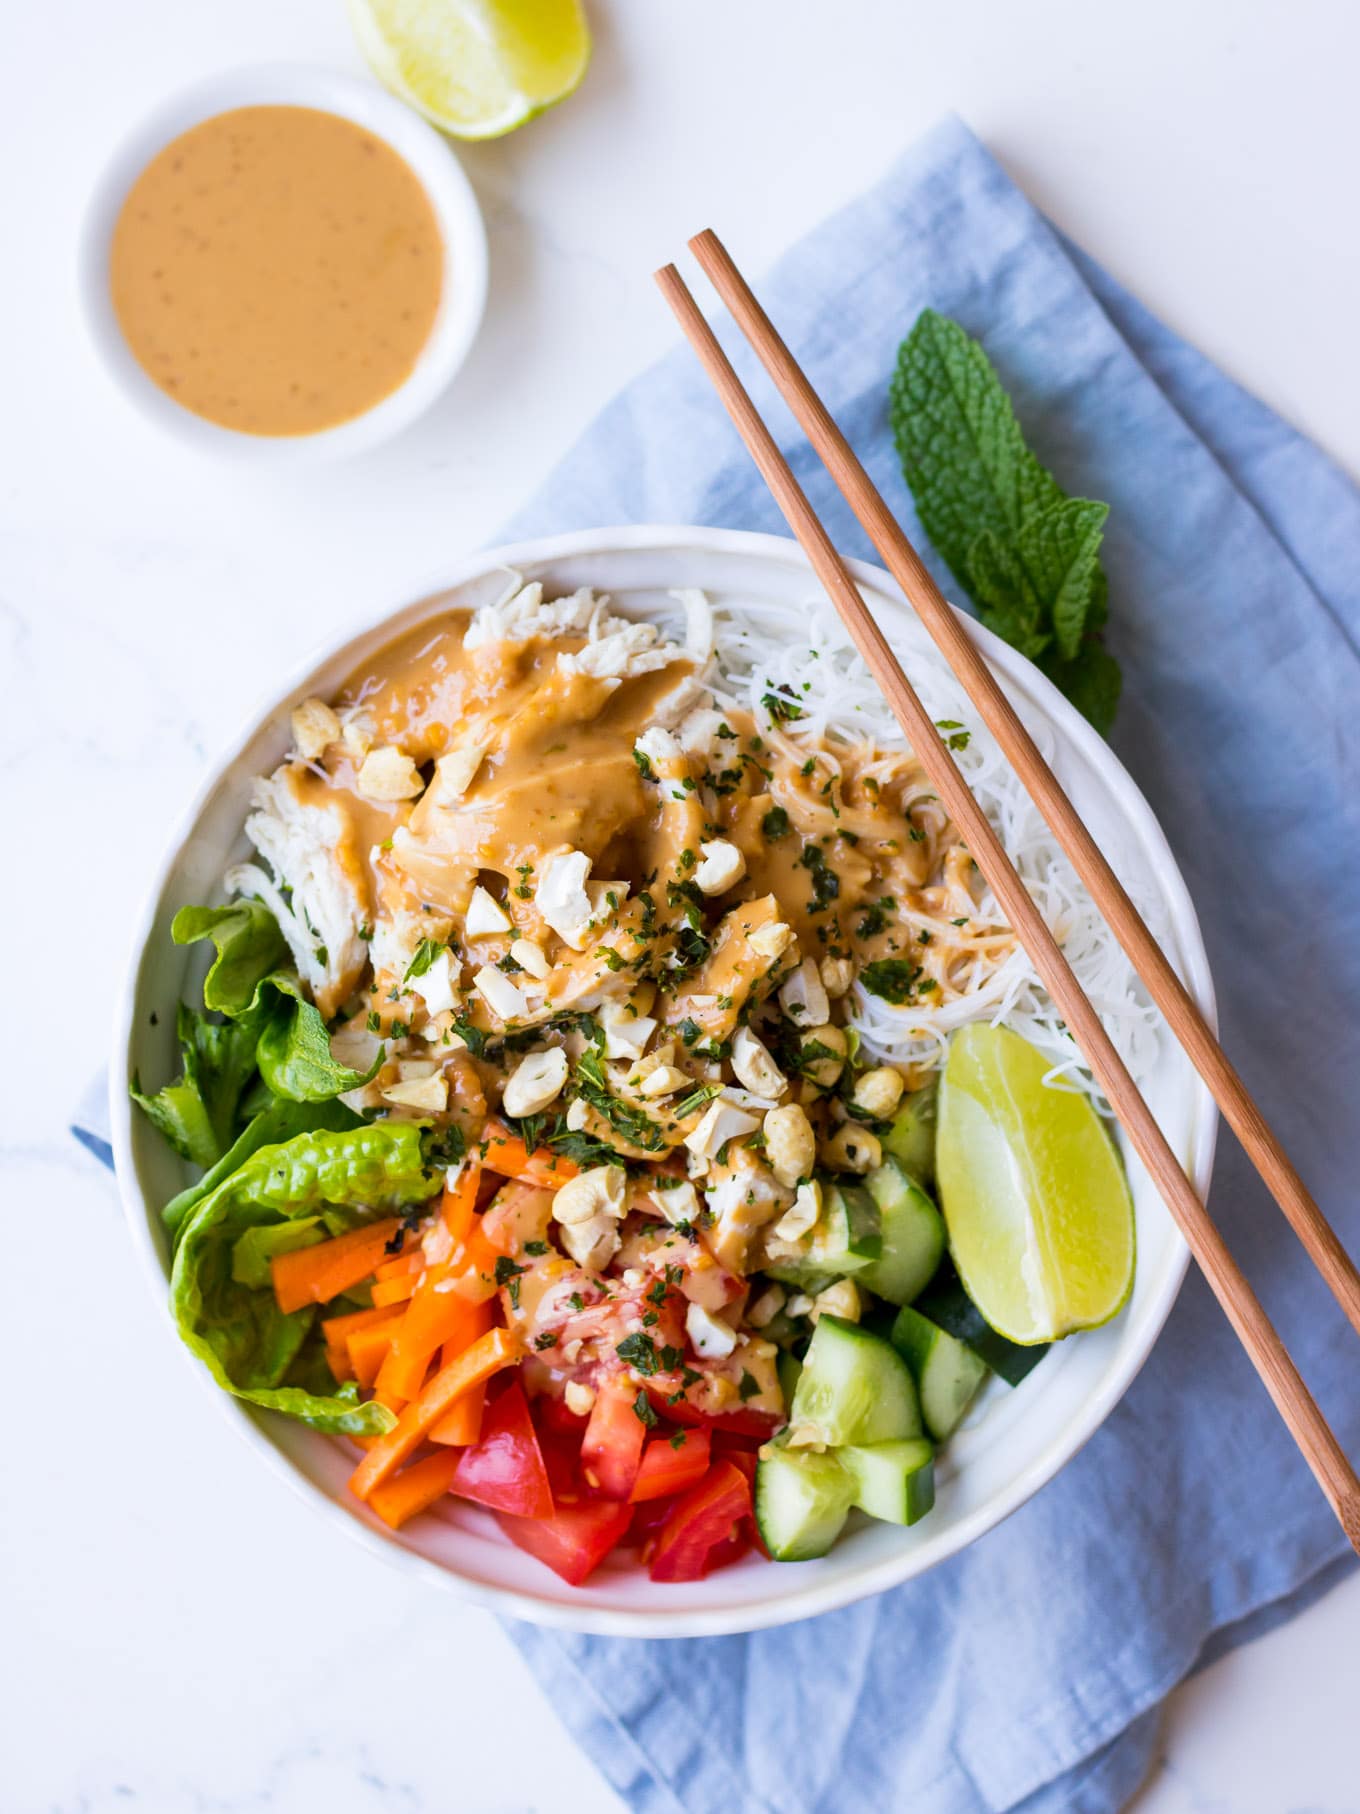 vermicelli noodle bowl with peanut butter sauce, poached chicken and fresh vegetables